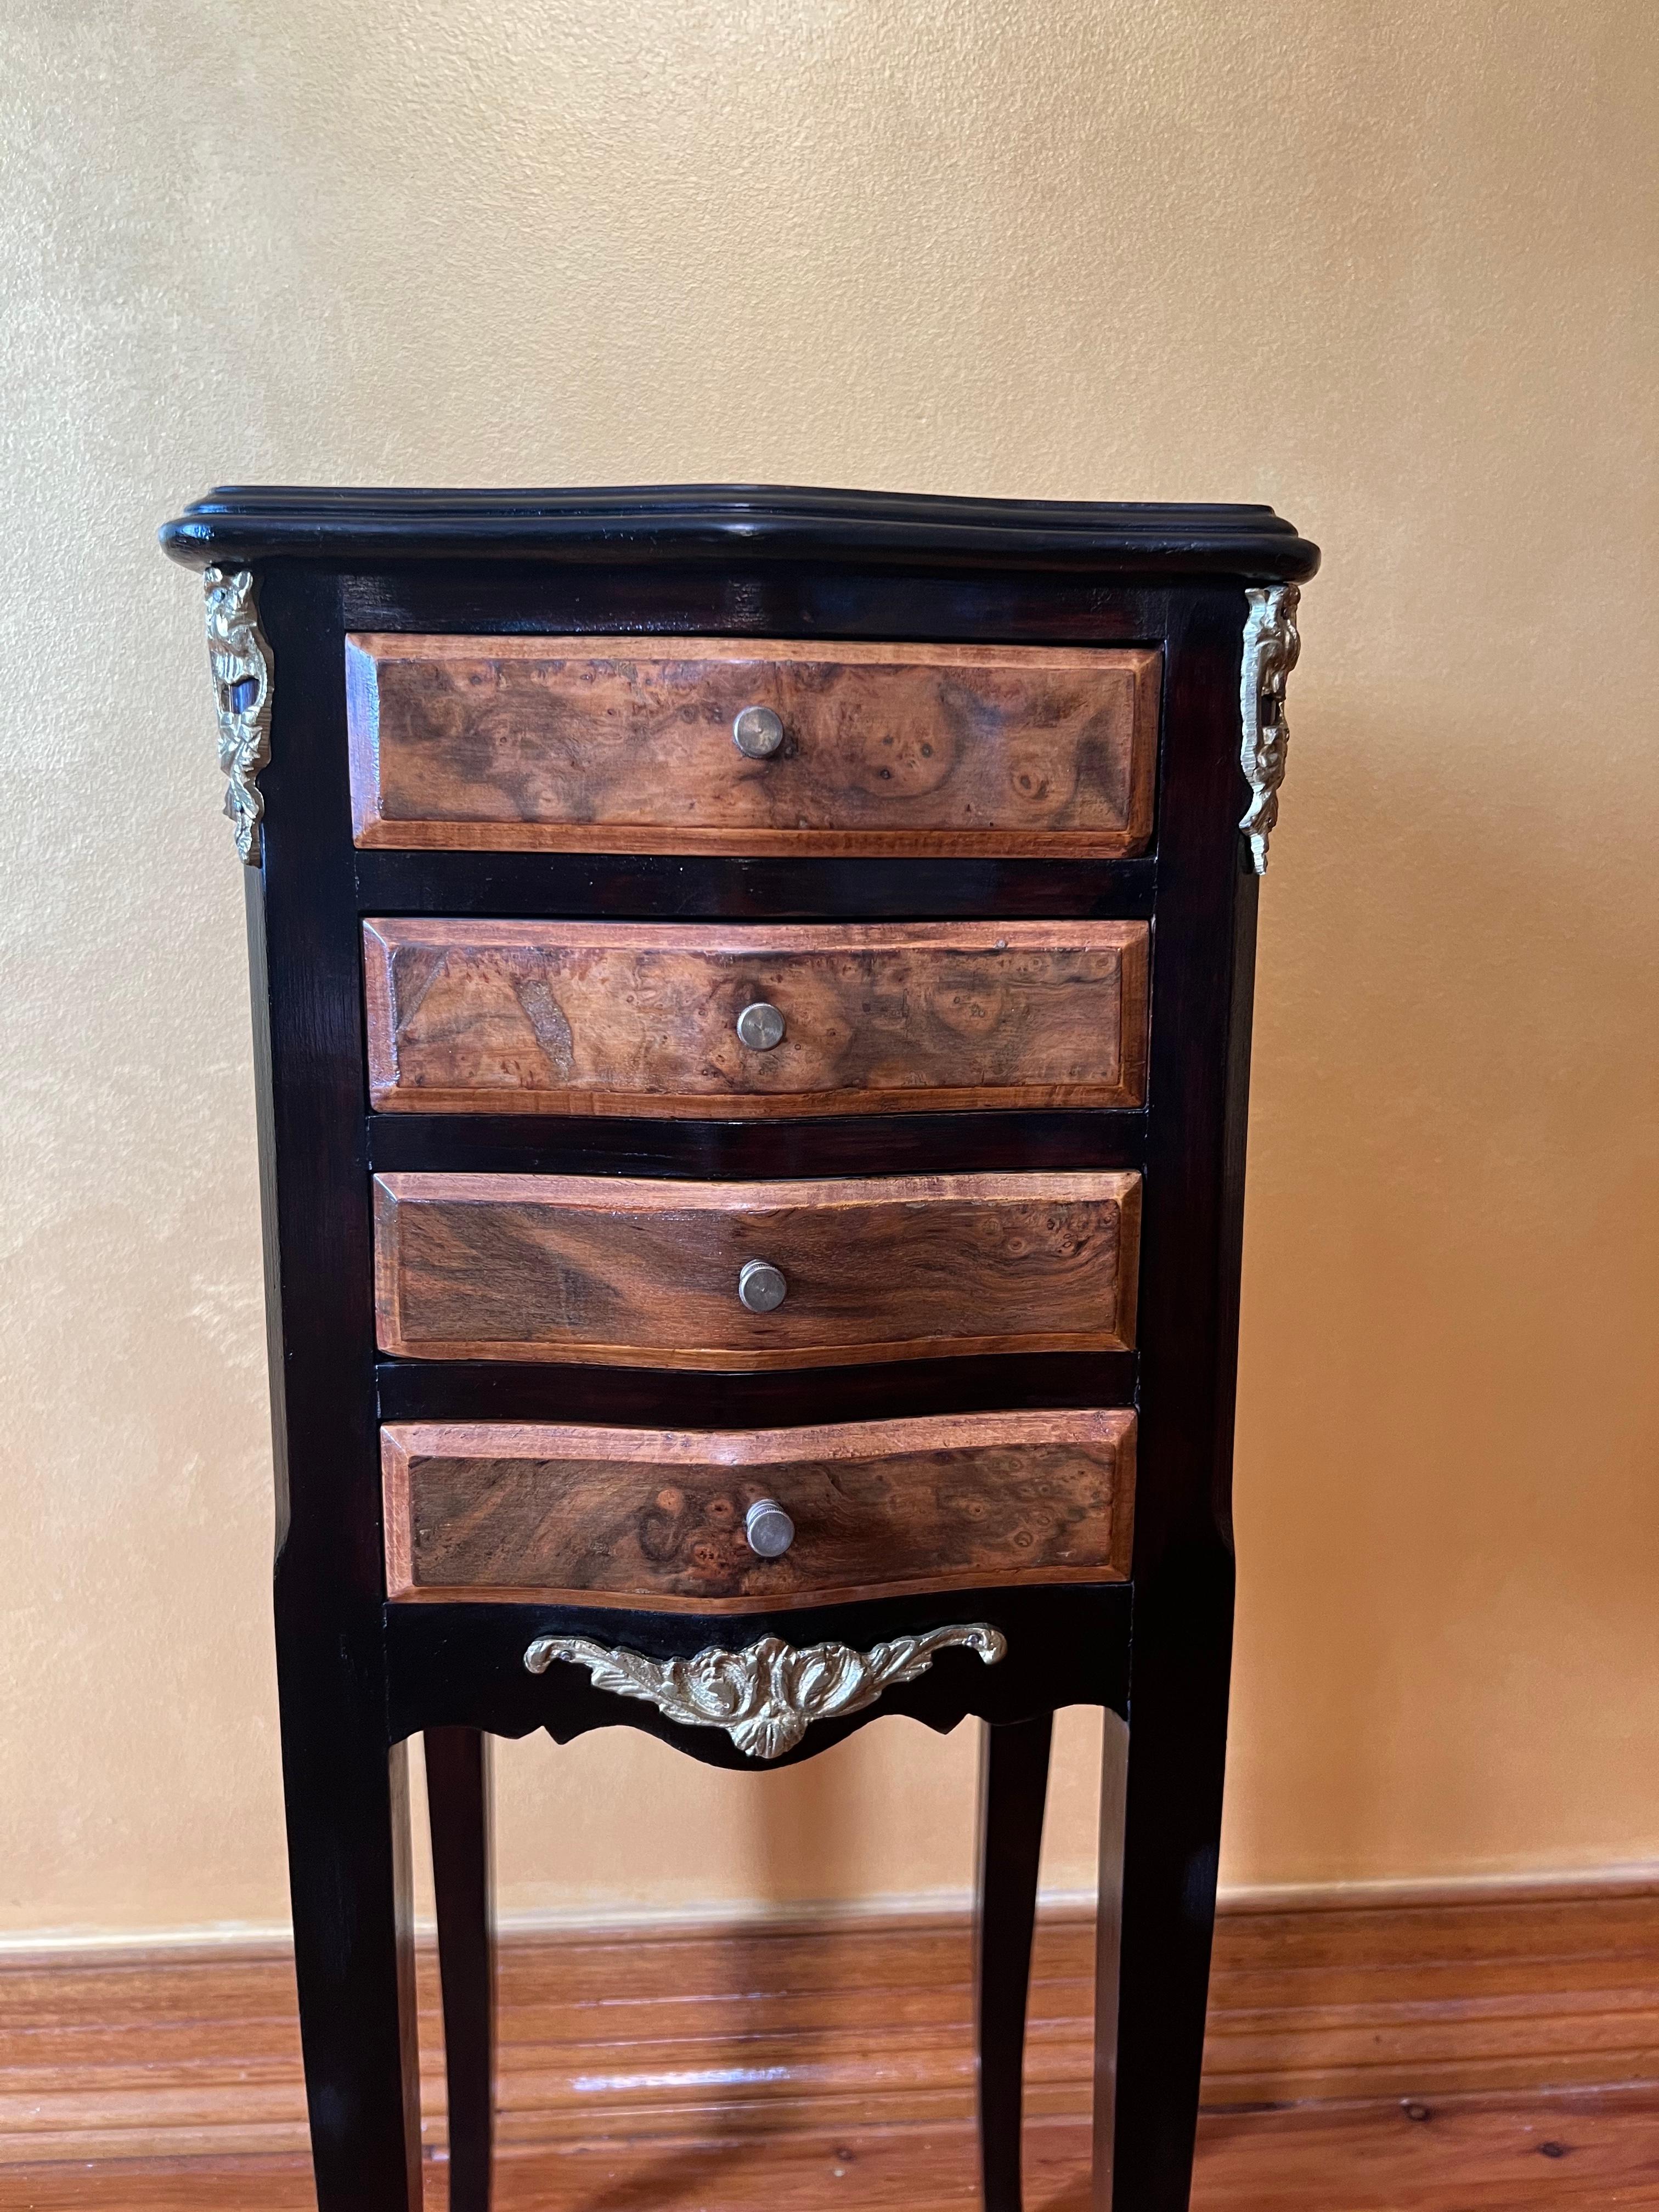 Burr wood on all four drawers, top and both sides, brass details on chest and legs

Circa: Early 20th Century

Material: Walnut Burr

Country Of Origin: France

Measurements: 75cm high, 26cm width, 30cm length

Pick Up Location at: 64 Kalang Road,